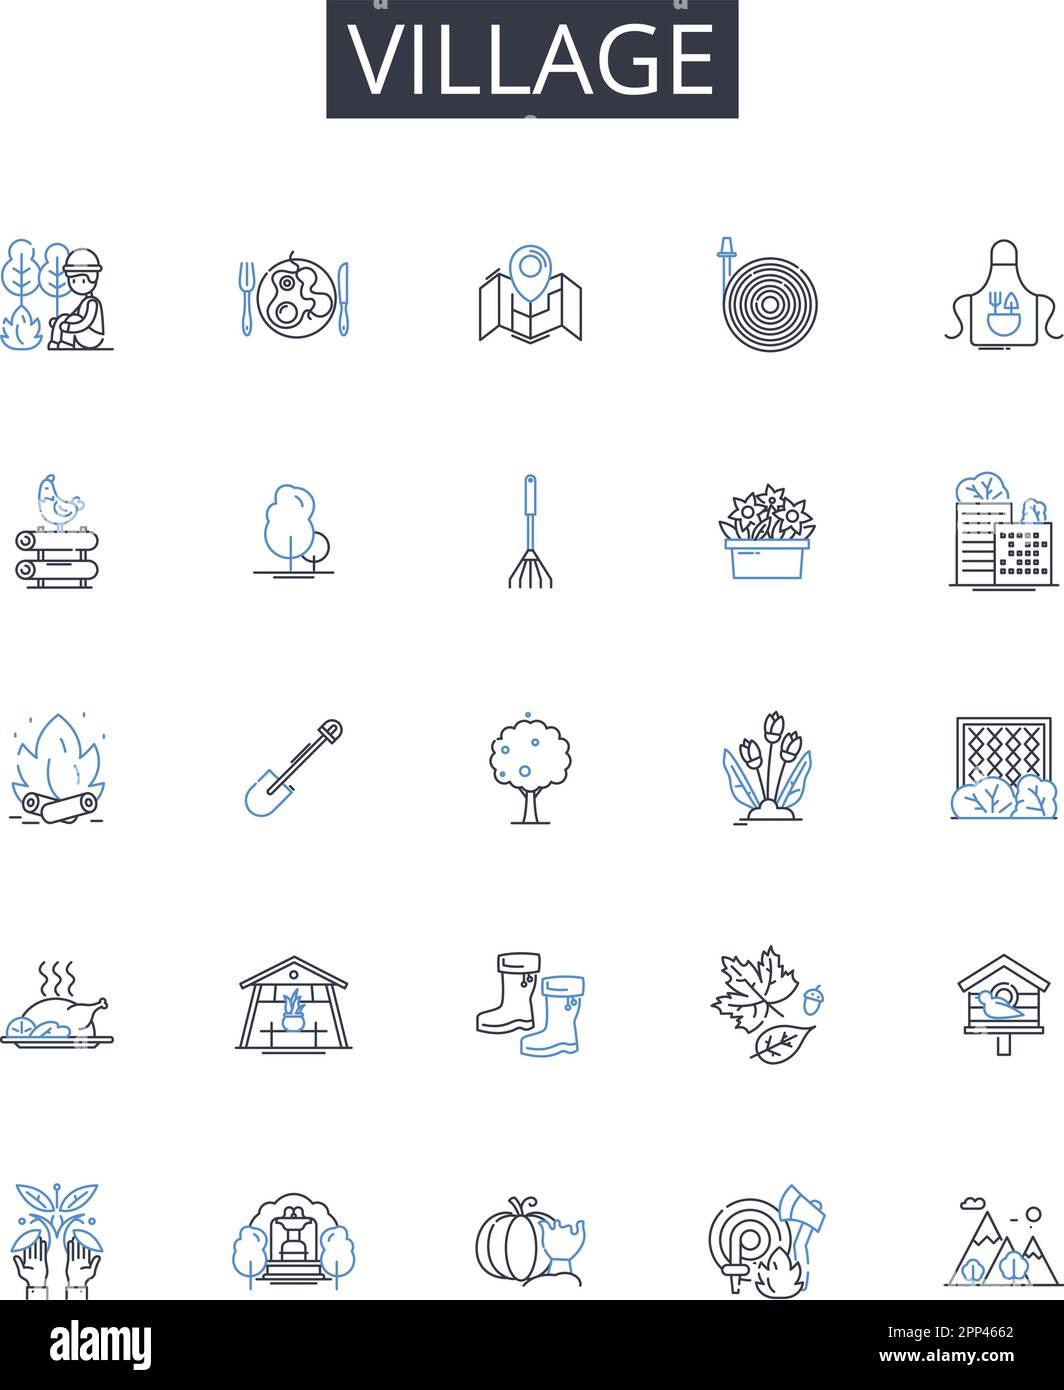 Village line icons collection. Collaboration, Communication, Support ...